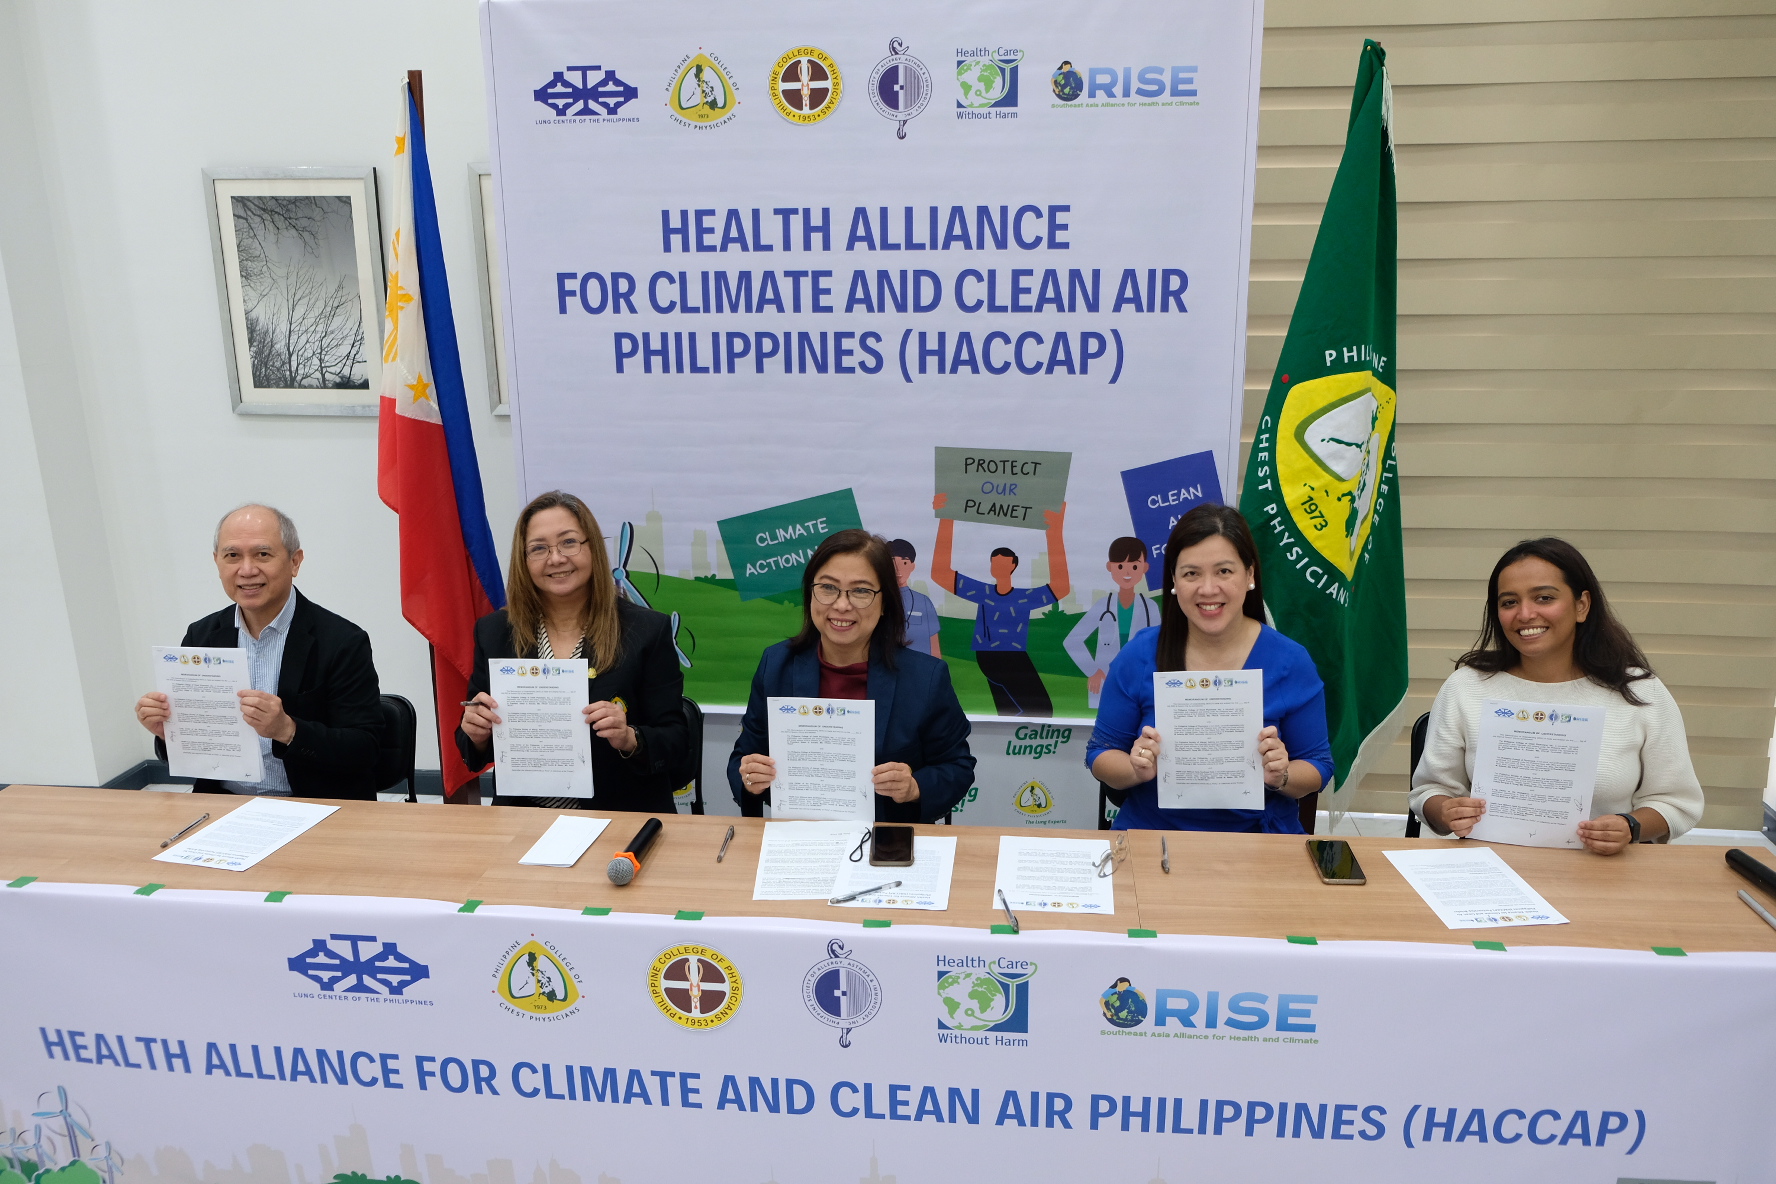 Philippine health organizations launch groundbreaking alliance for climate and clean air - HACCAP Launch and MOU Signing